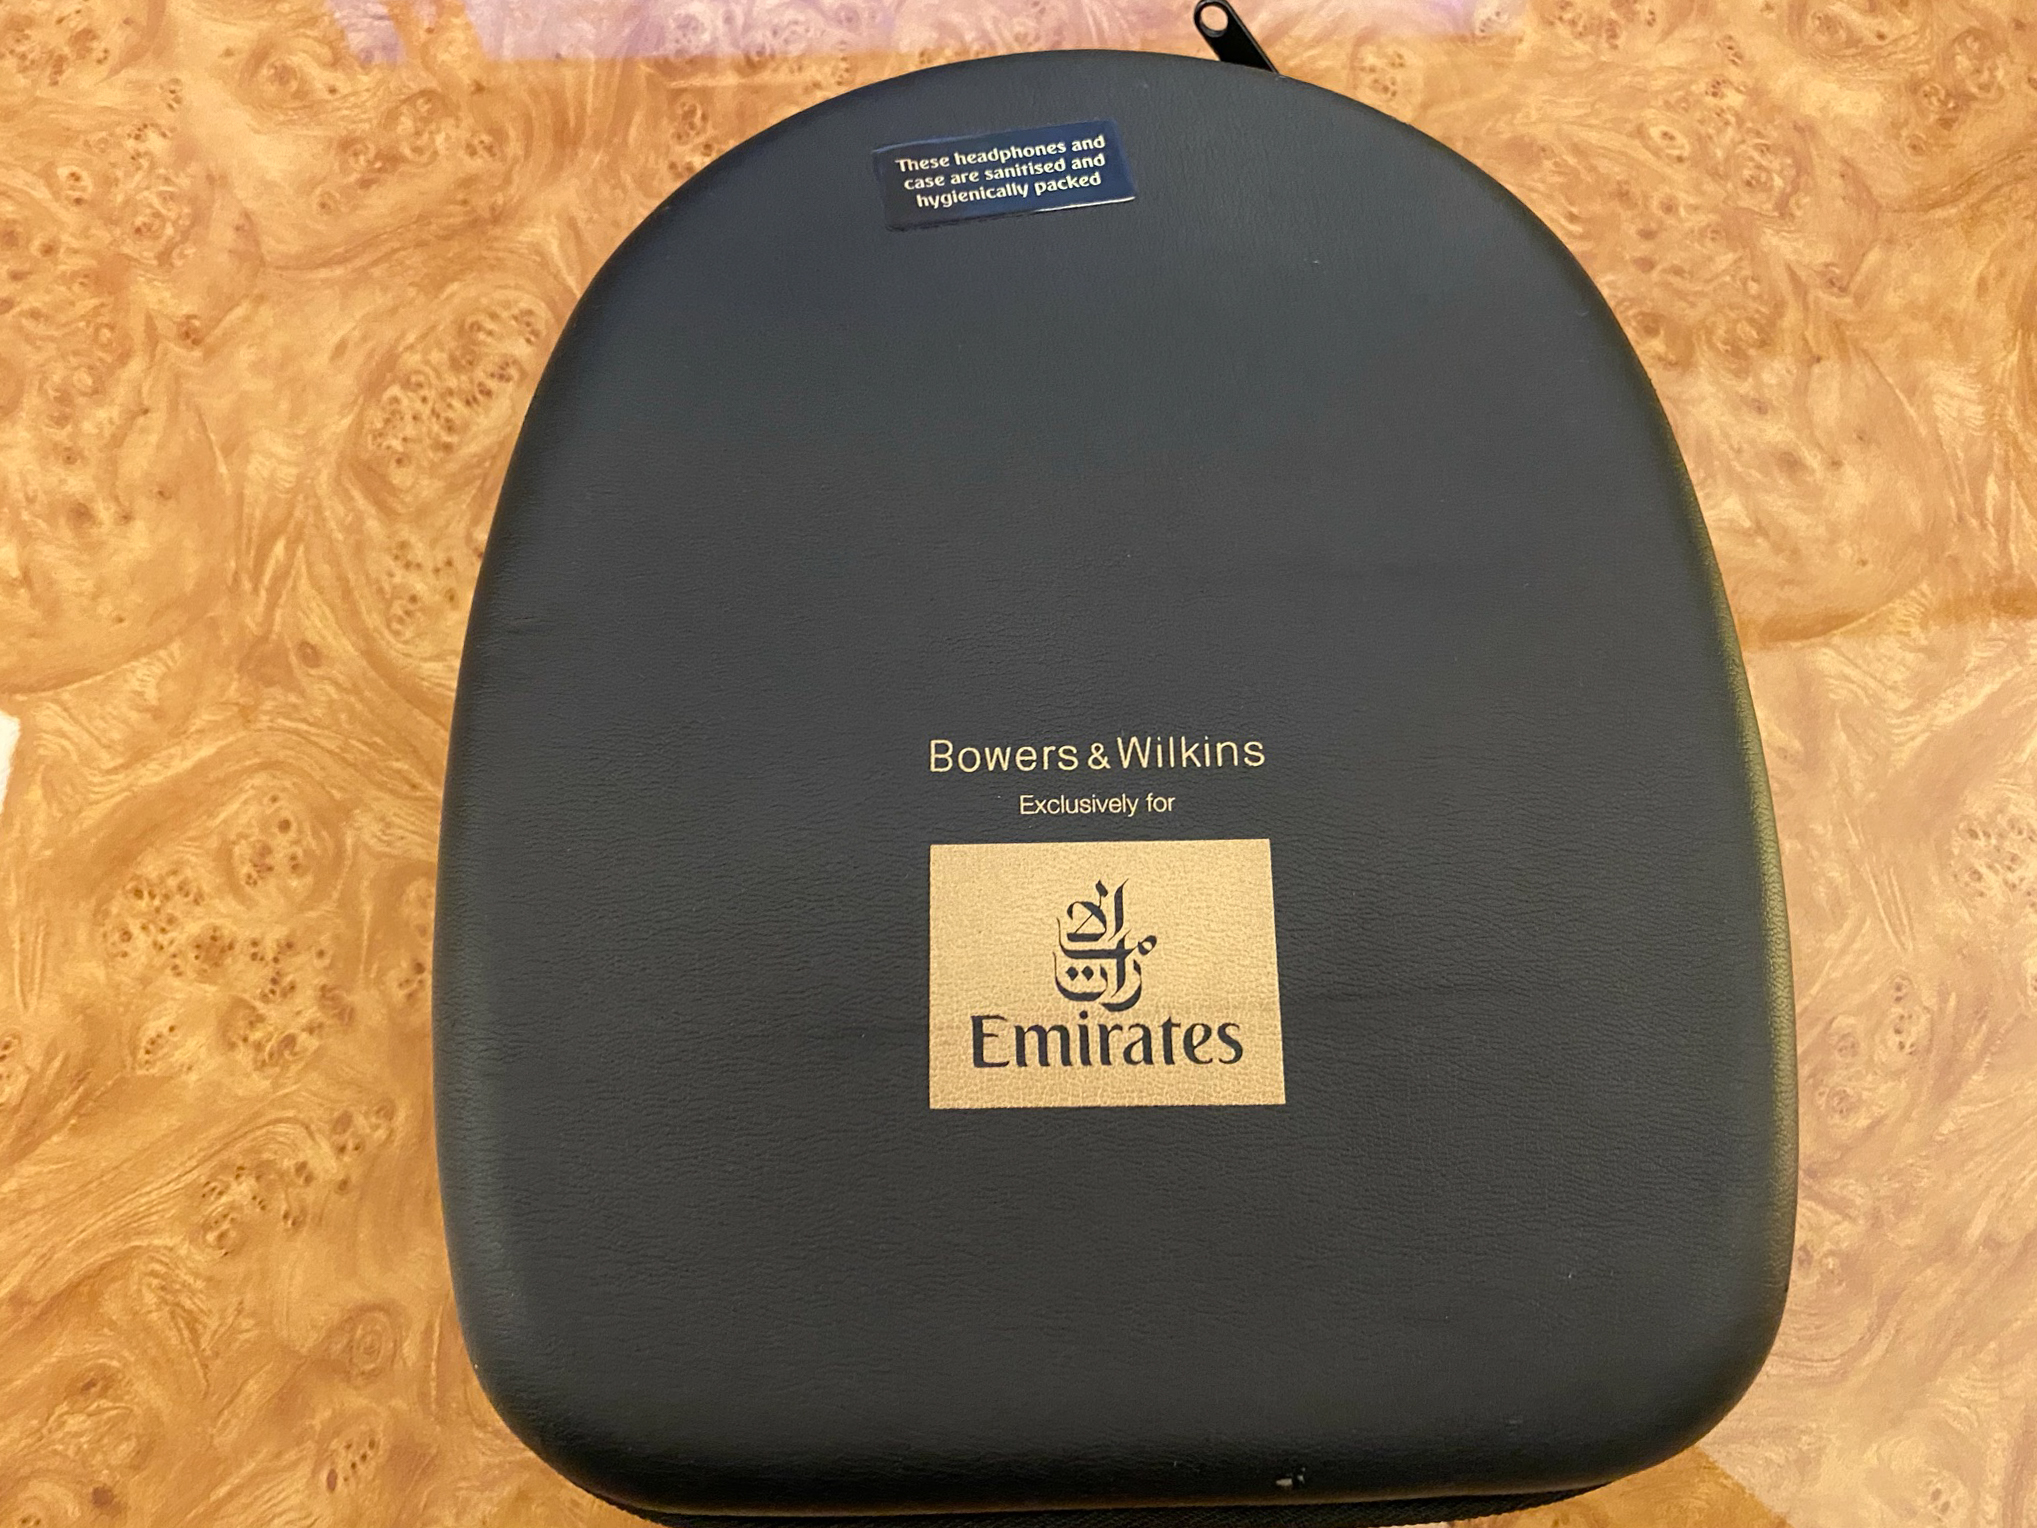 Emirates 777 First Class Noise Cancellation Headphones